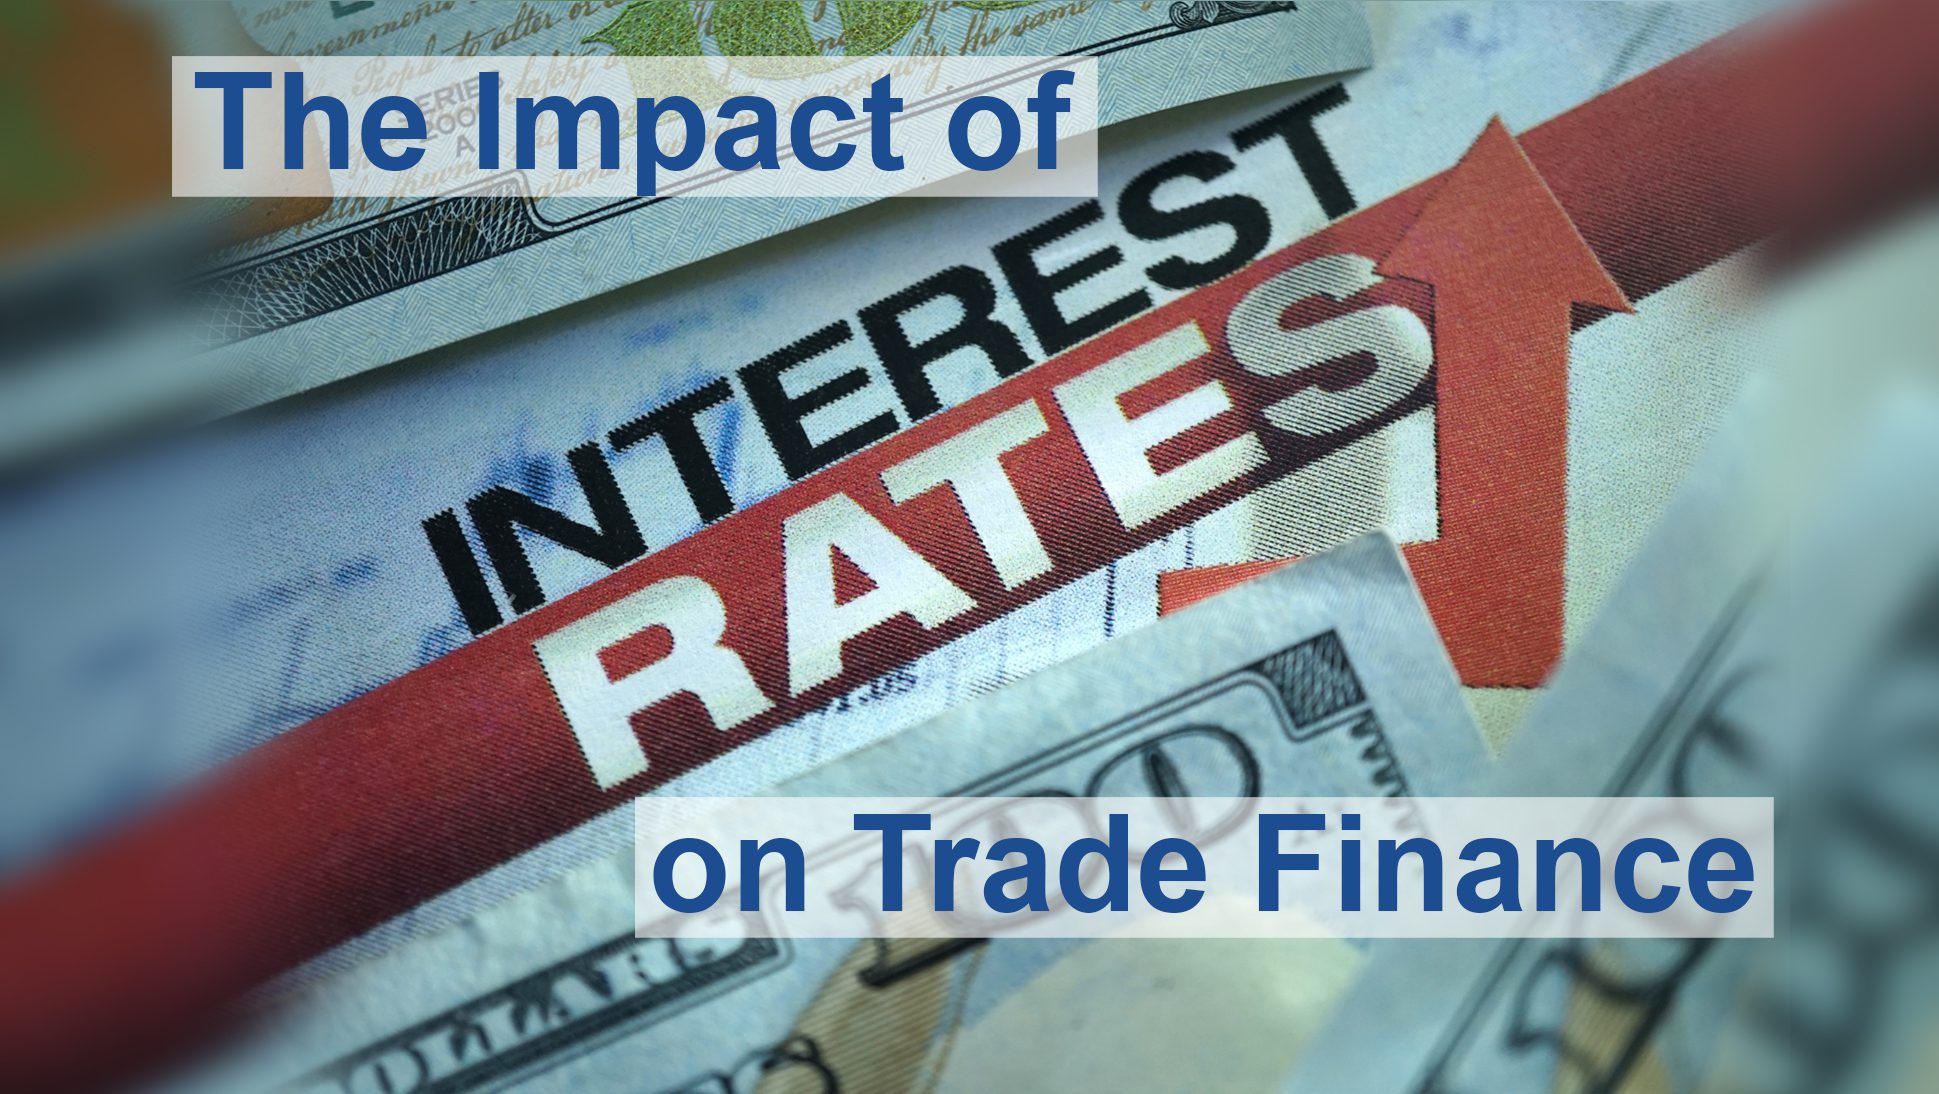 The banner image of the article 'The Impact of Intrest Rates on Trade Finance'.